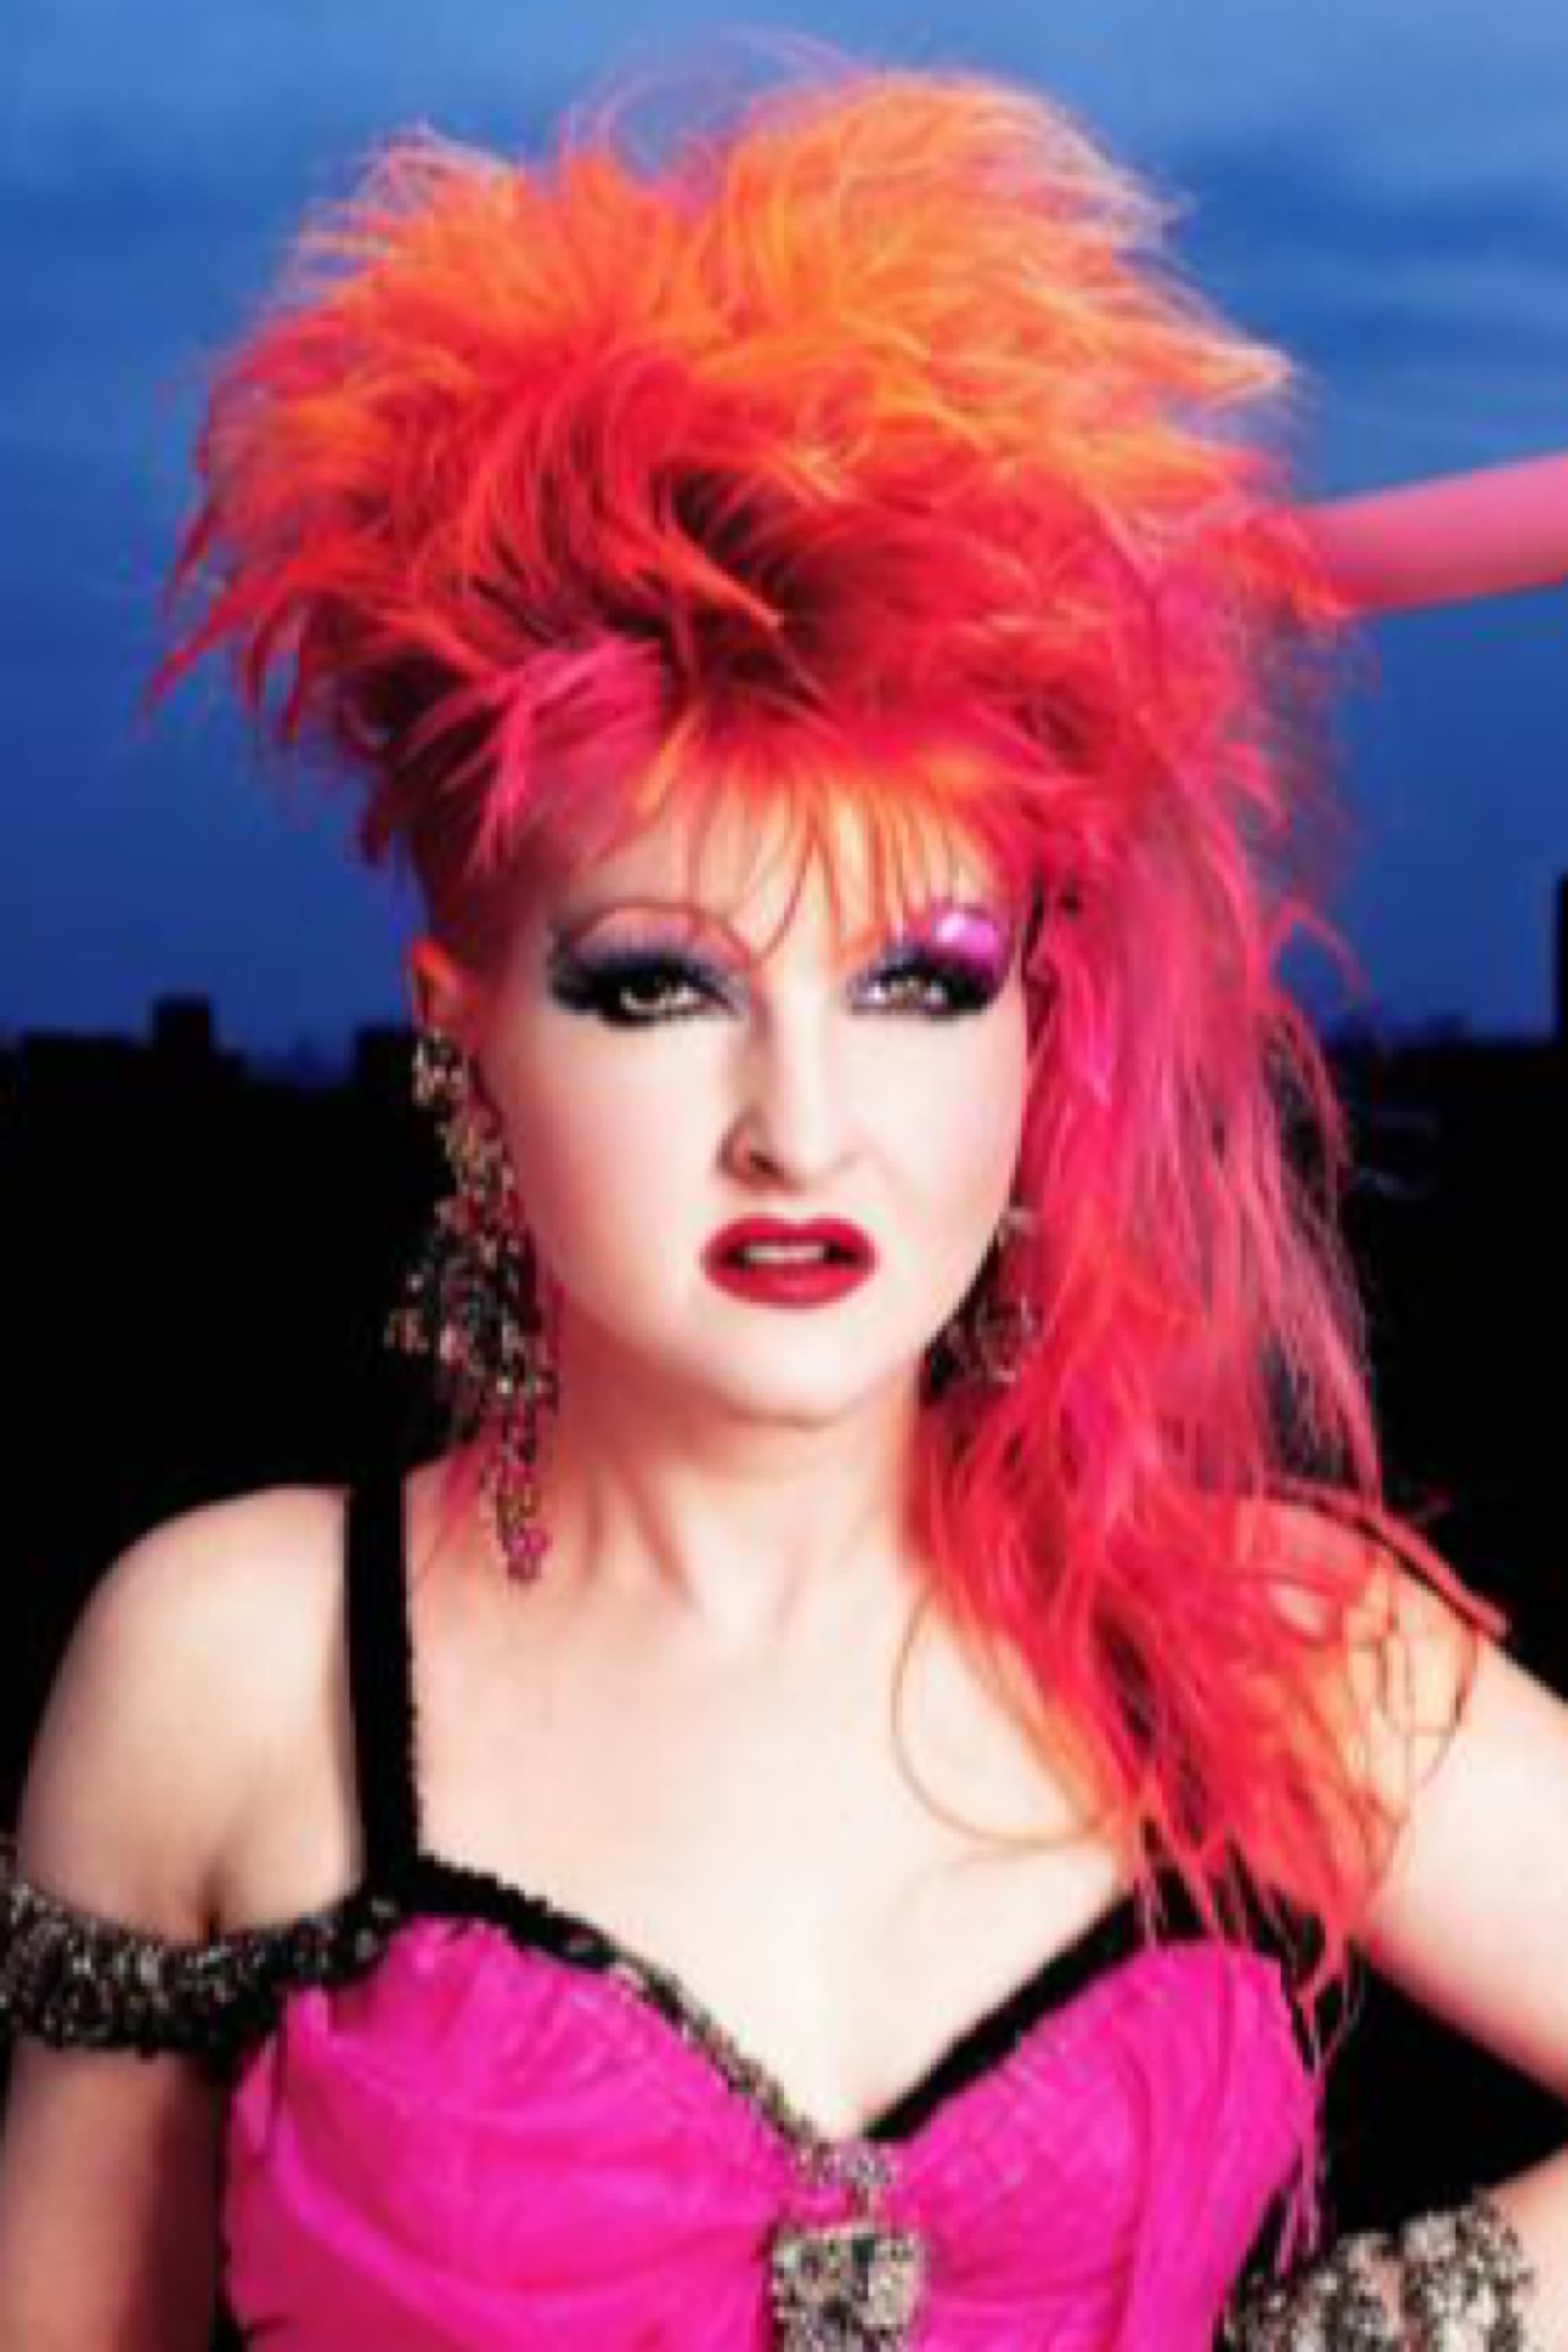 Naked pictures of cyndi lauper